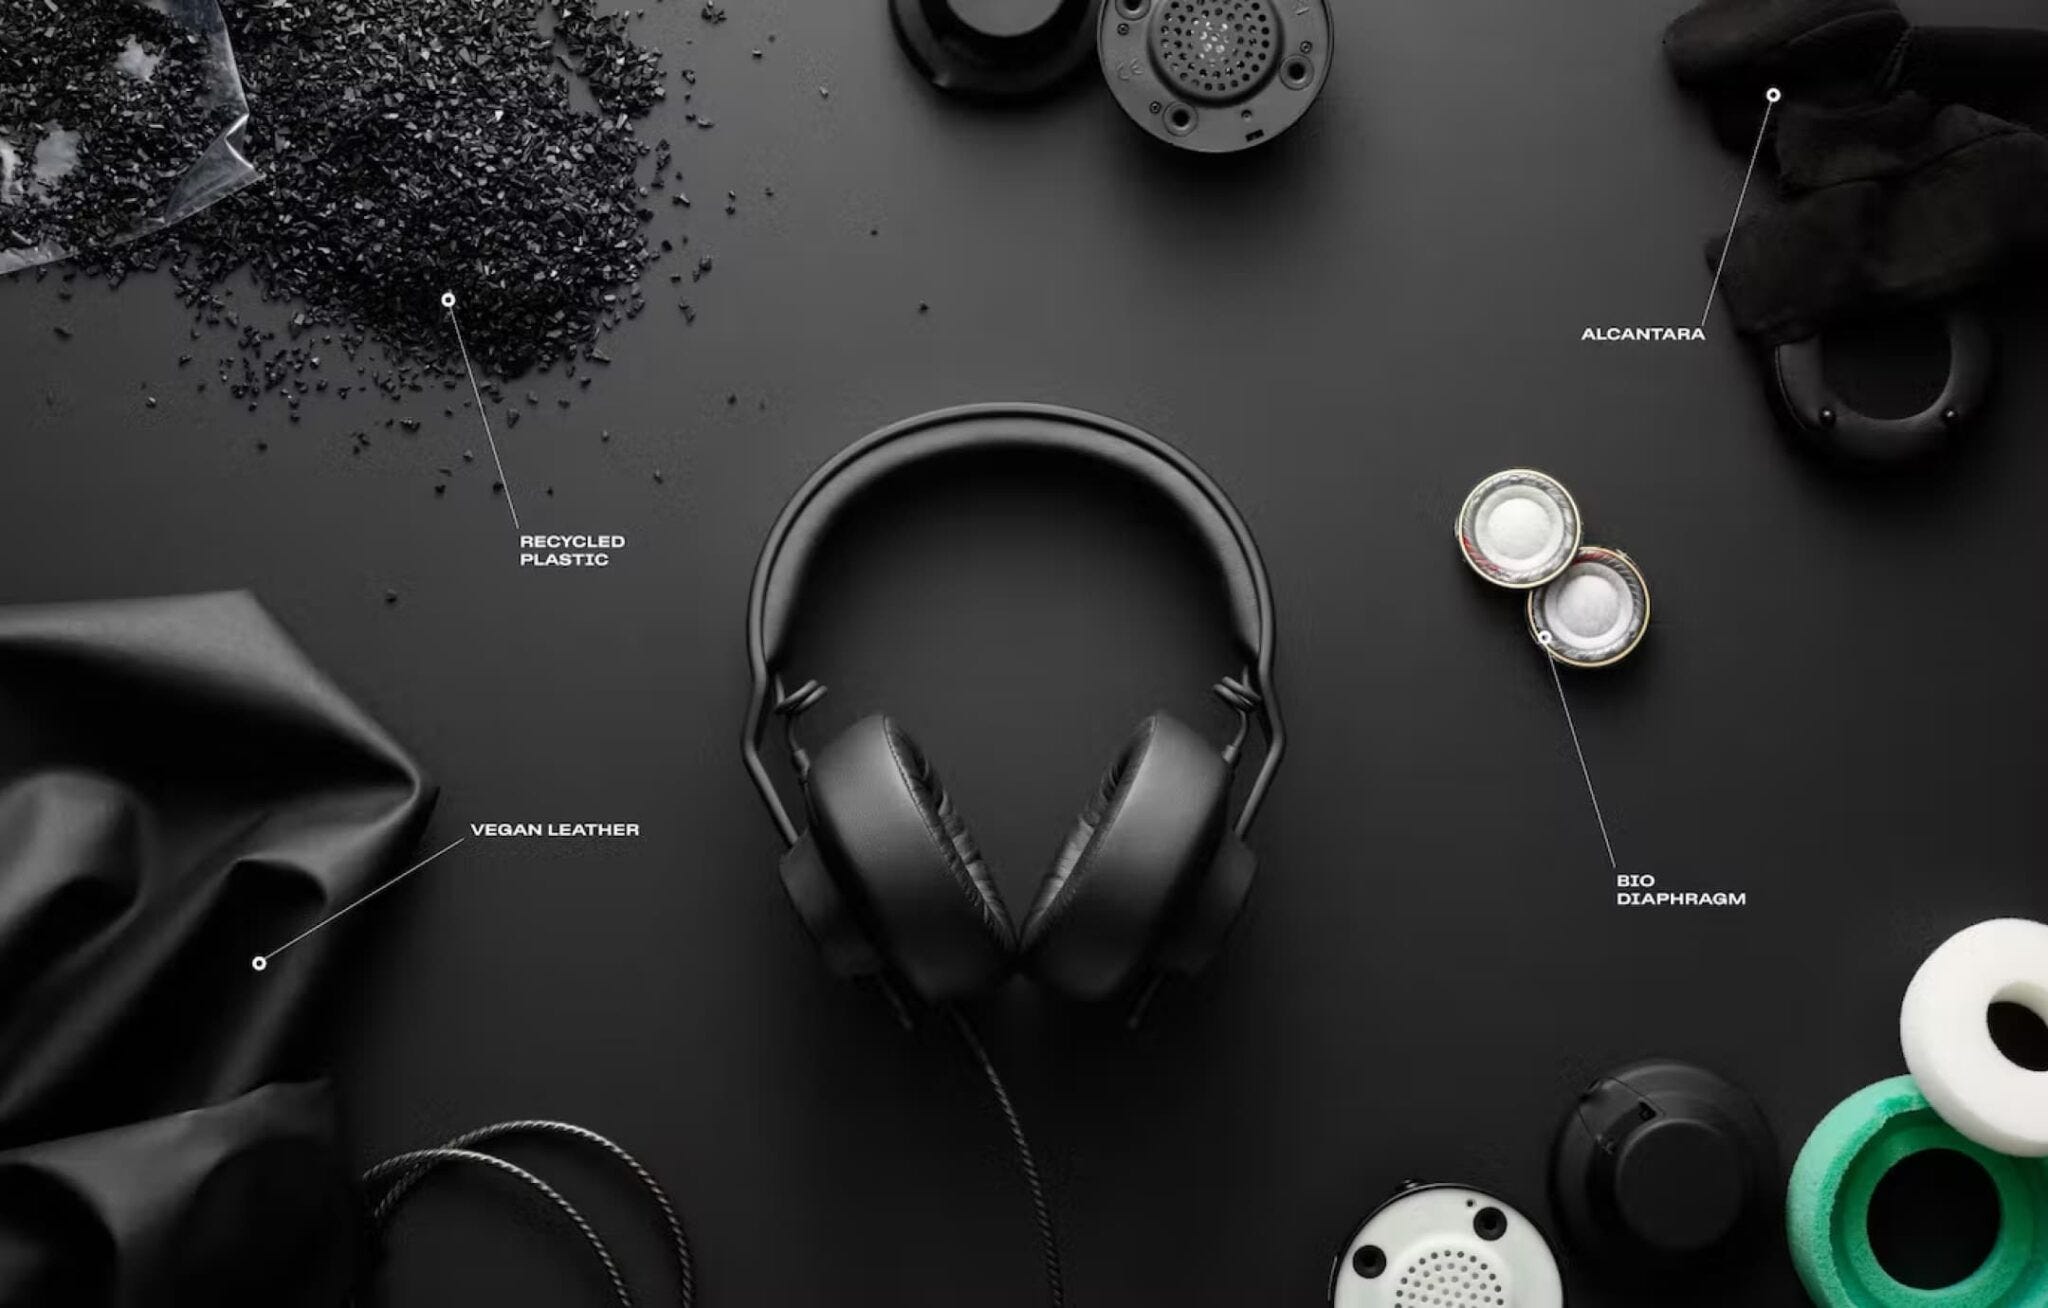 View of AIAIAI's TMA-2 headphones with overlaid information about its materials